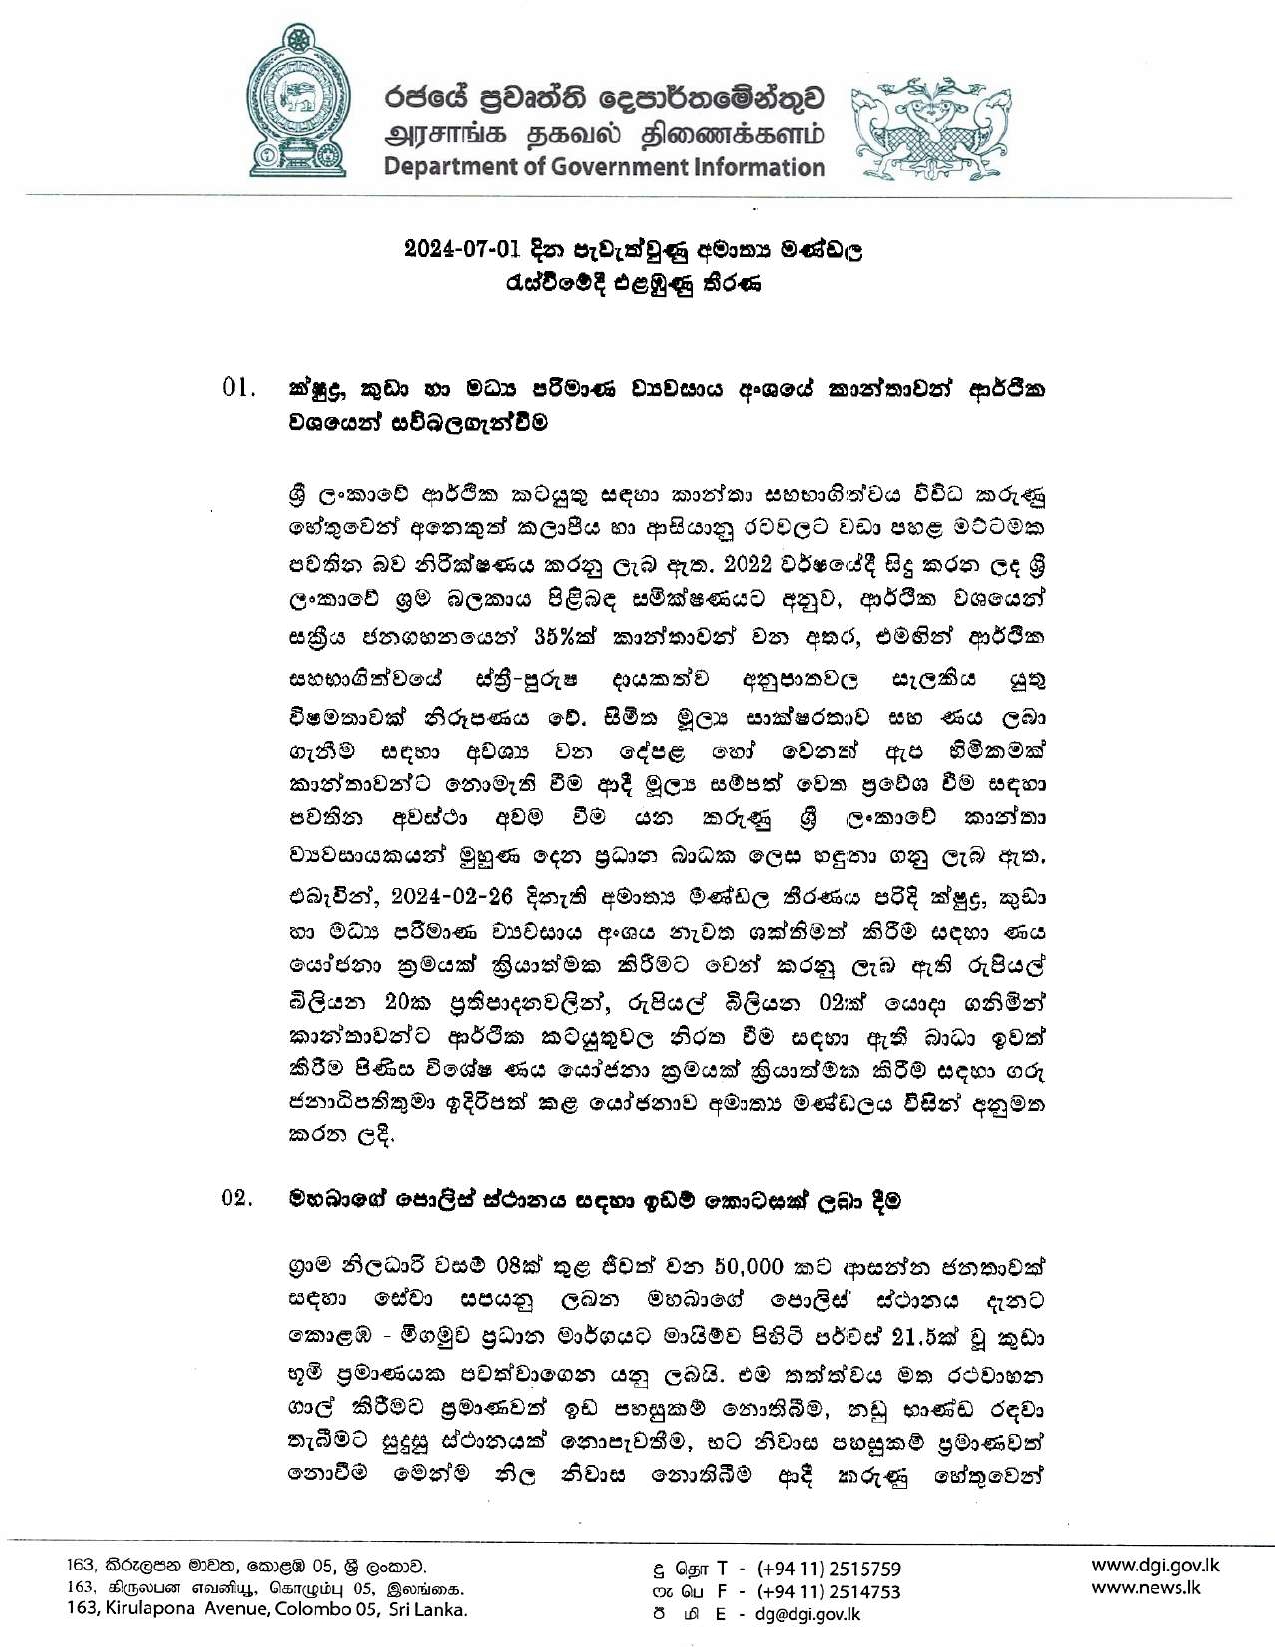 Cabinet Decisions on 01.07.2024 compressed page 00011